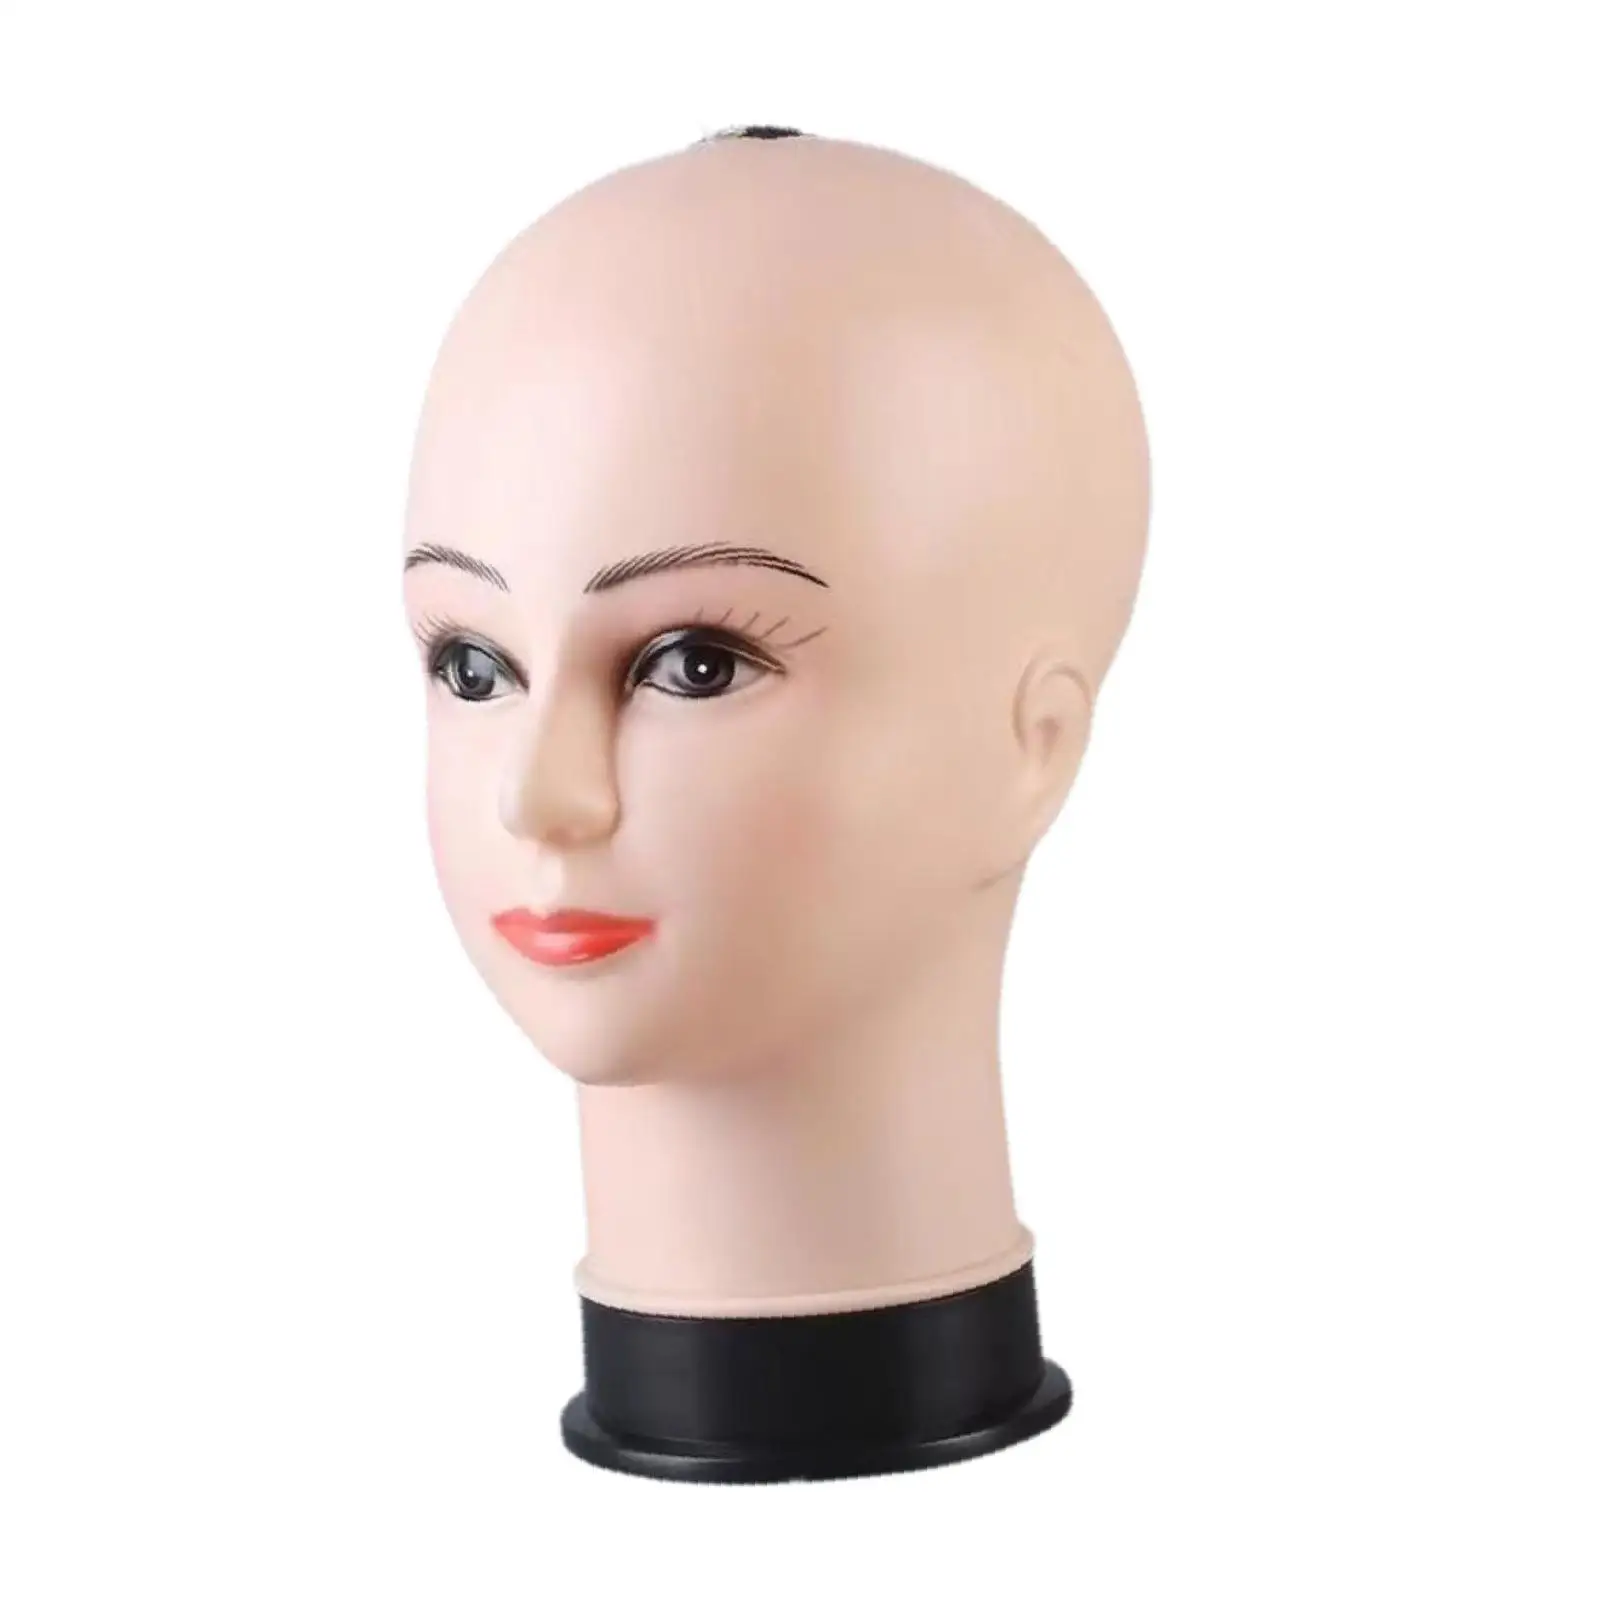 

Female Mannequin Head Makeup Head Model Lightweight Beauty Wig Model Head Stand Hat Display Rack for Wig Glasses Jewelry Hats